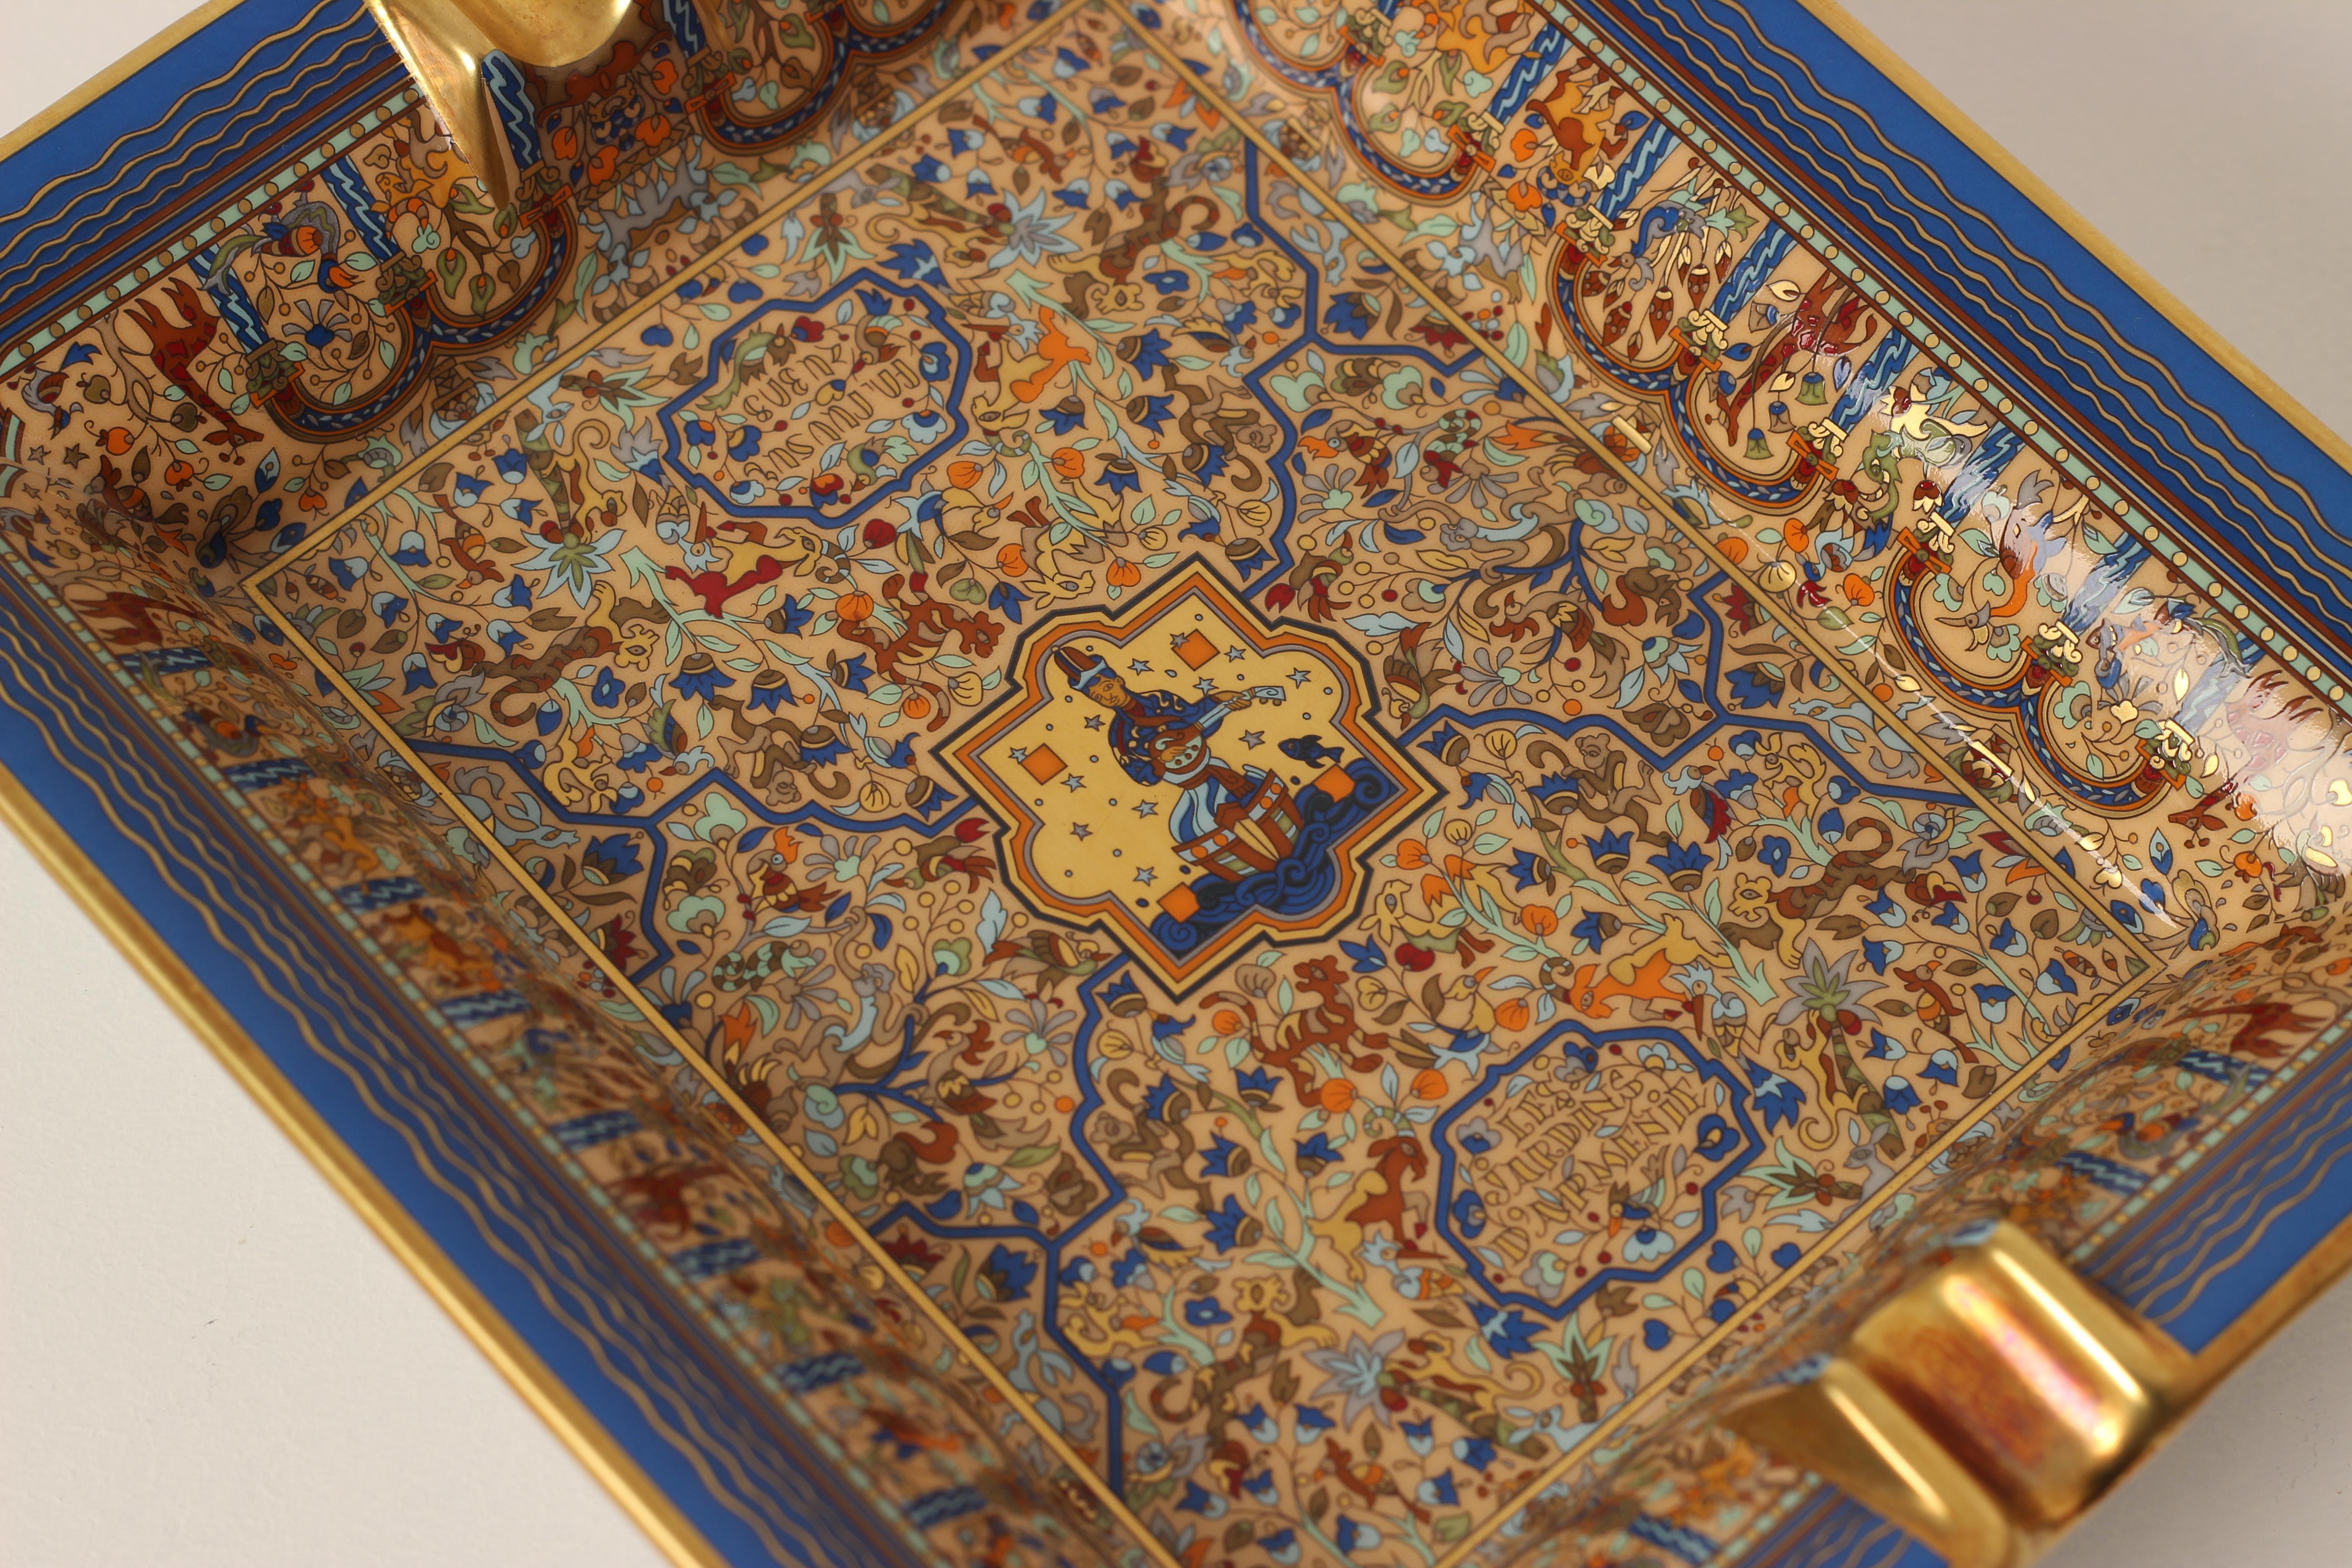 A Hermes porcelain Les Jardins d'Armenie ashtray or Vide-Poche catchall. 

Depicting an exotic Armenian garden intricately details and displayed in blue and gold border. Protected by velvet goatskin on the base, which would sit well on any